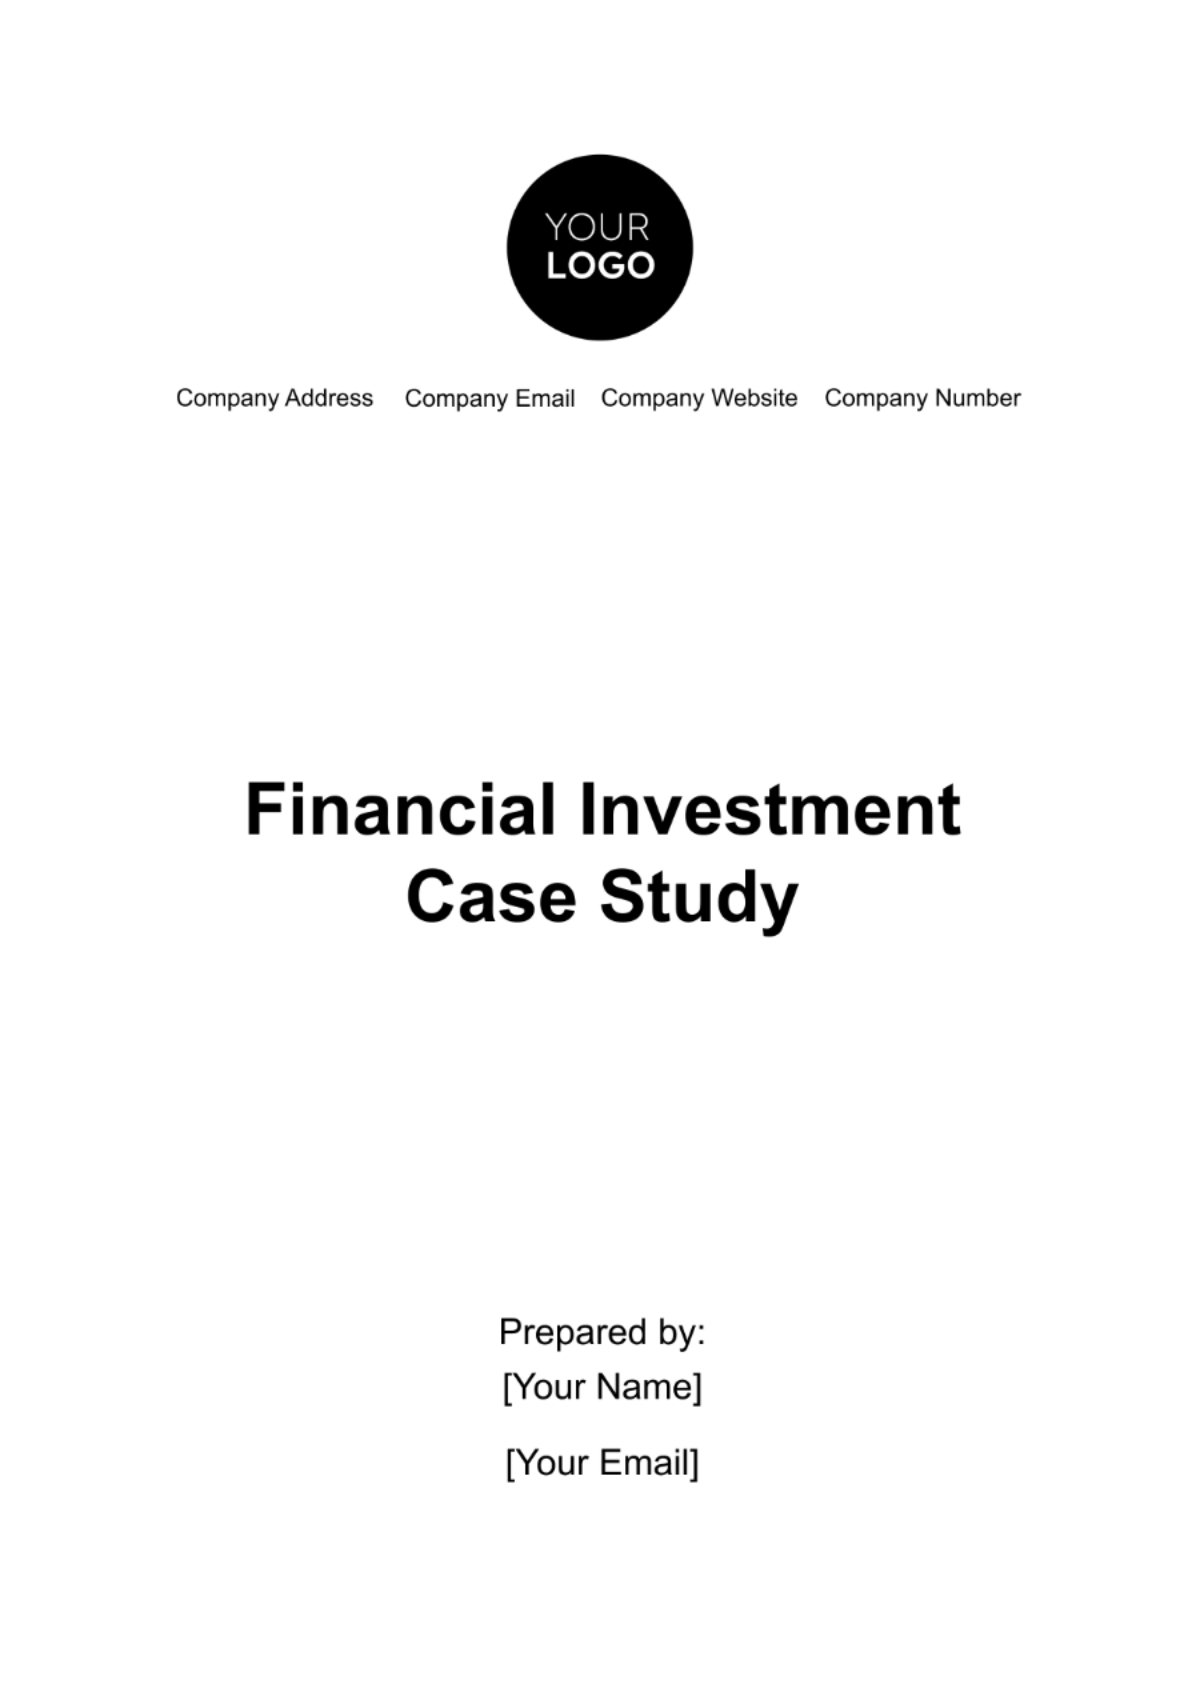 Financial Investment Case Study Template